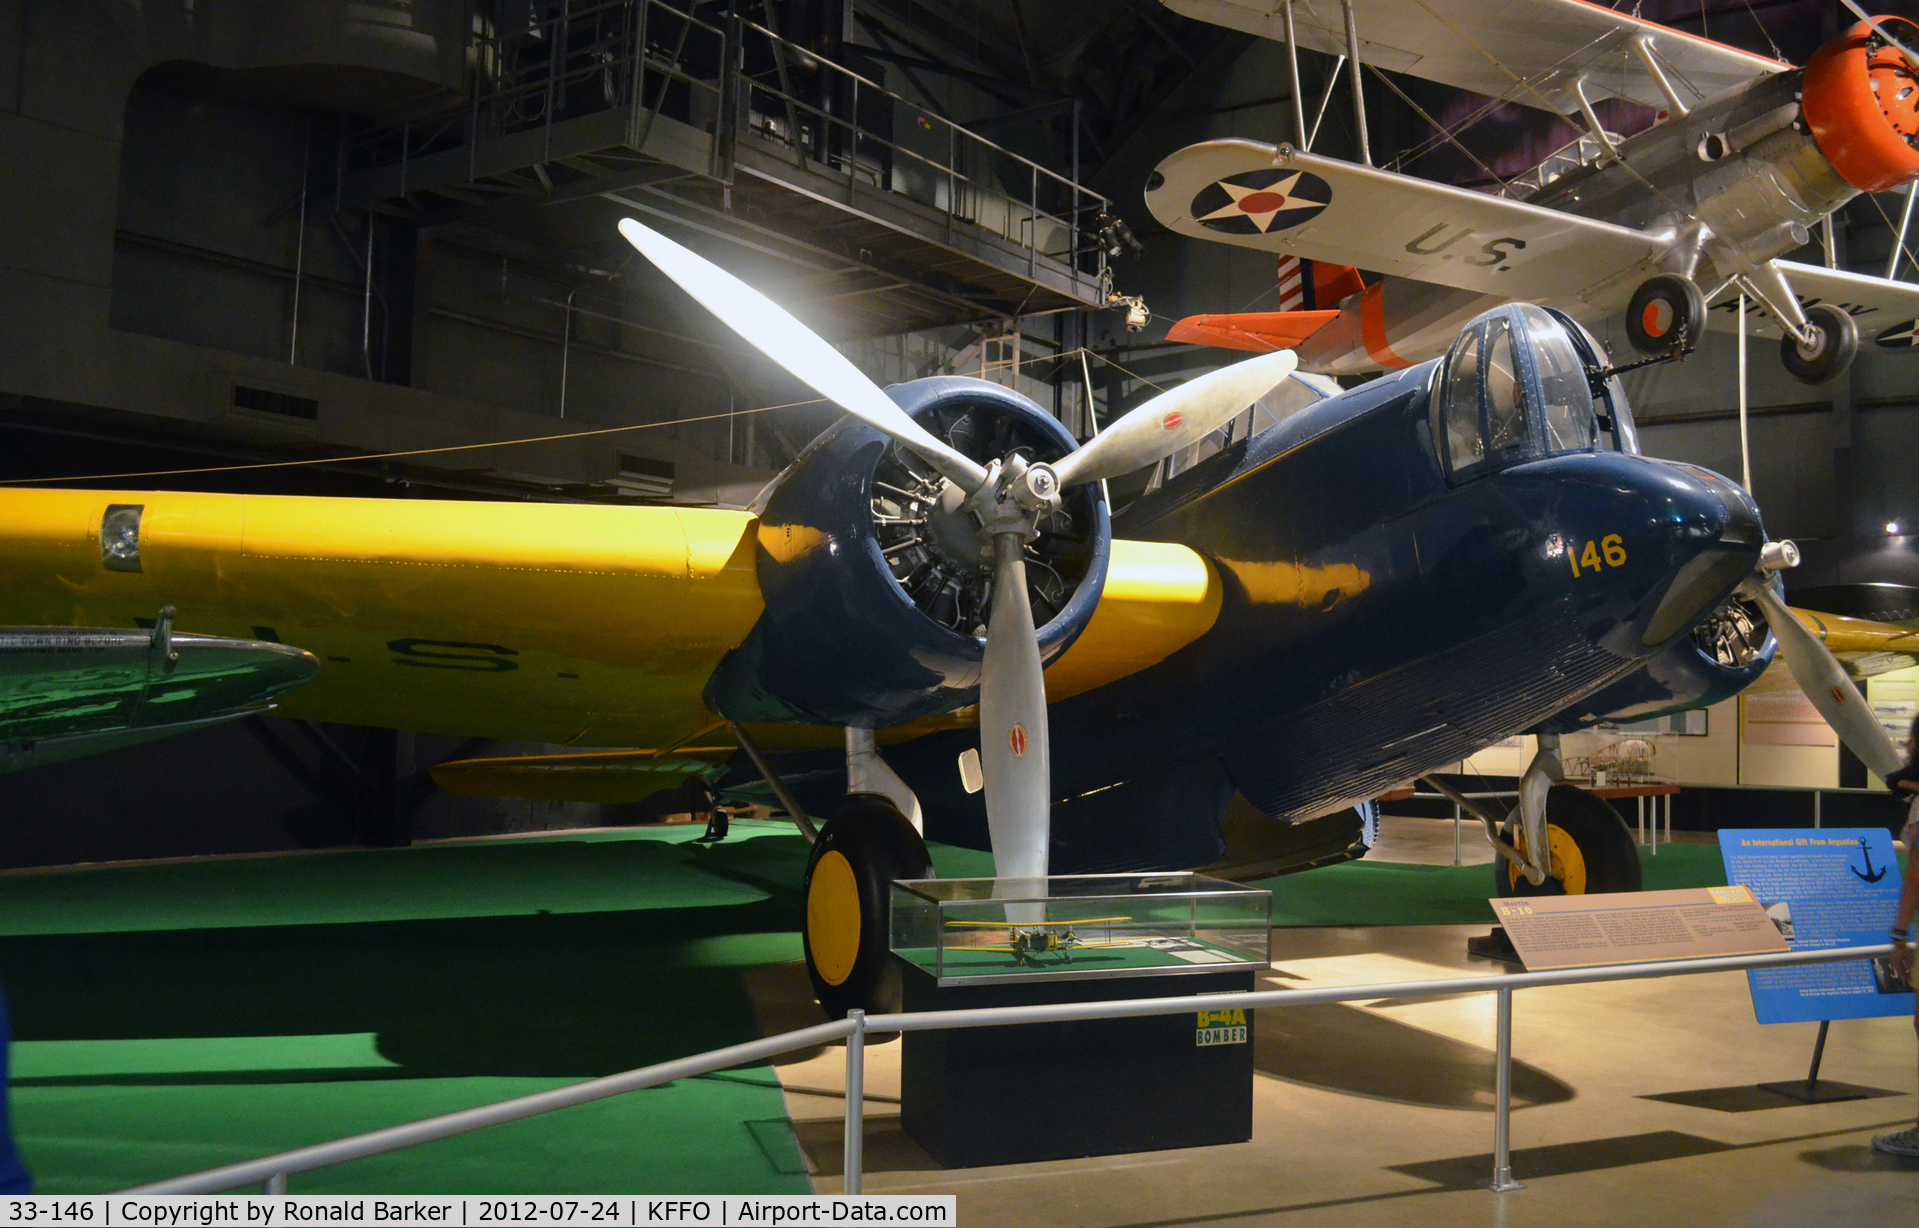 33-146, 1933 Martin YB-10 C/N 514, B-10 at the AF museum